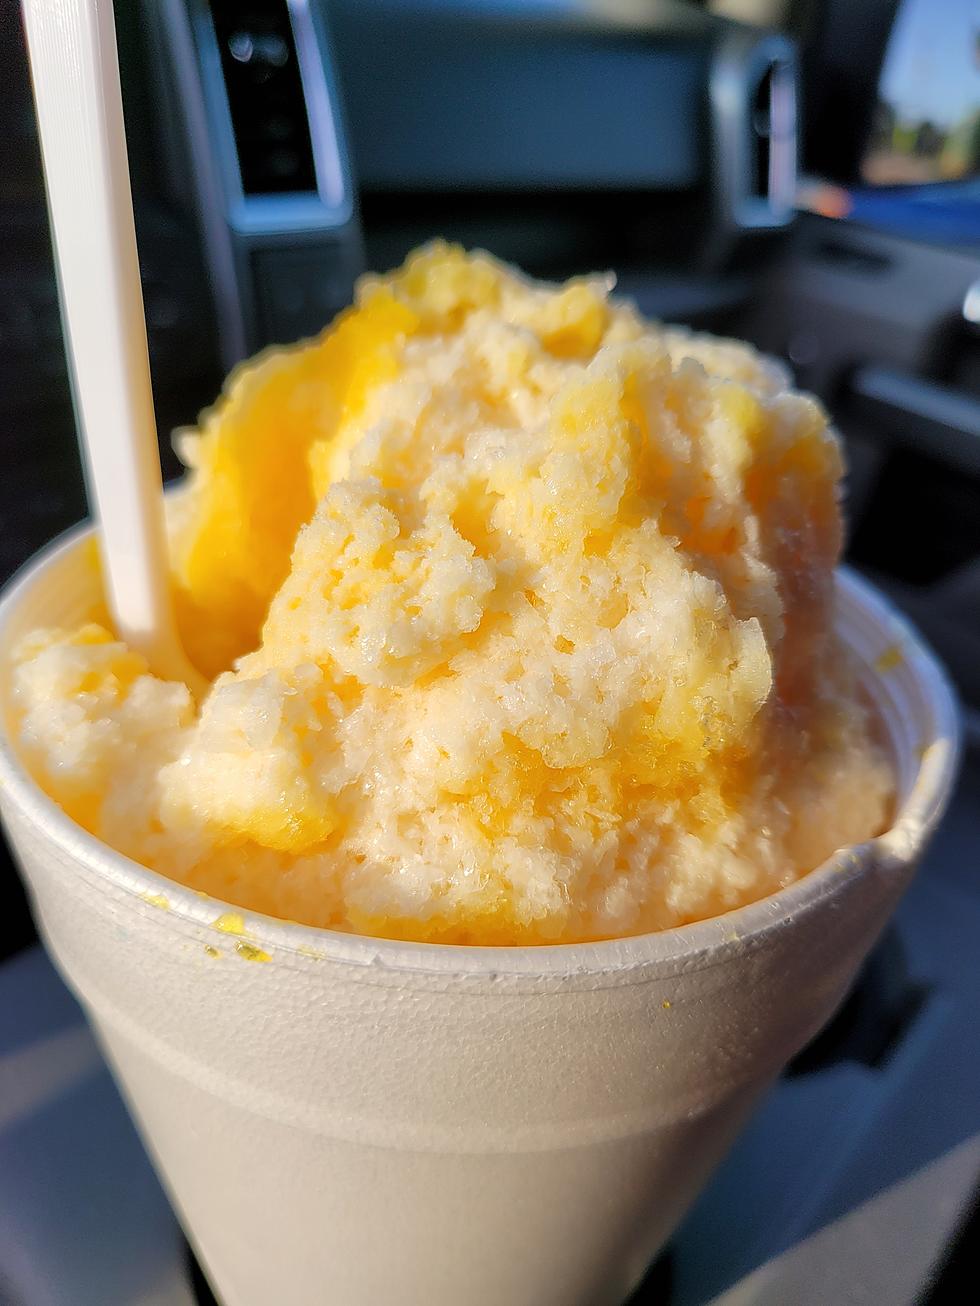 Texoma Snowball Stand Brings In My Hometown Flavor